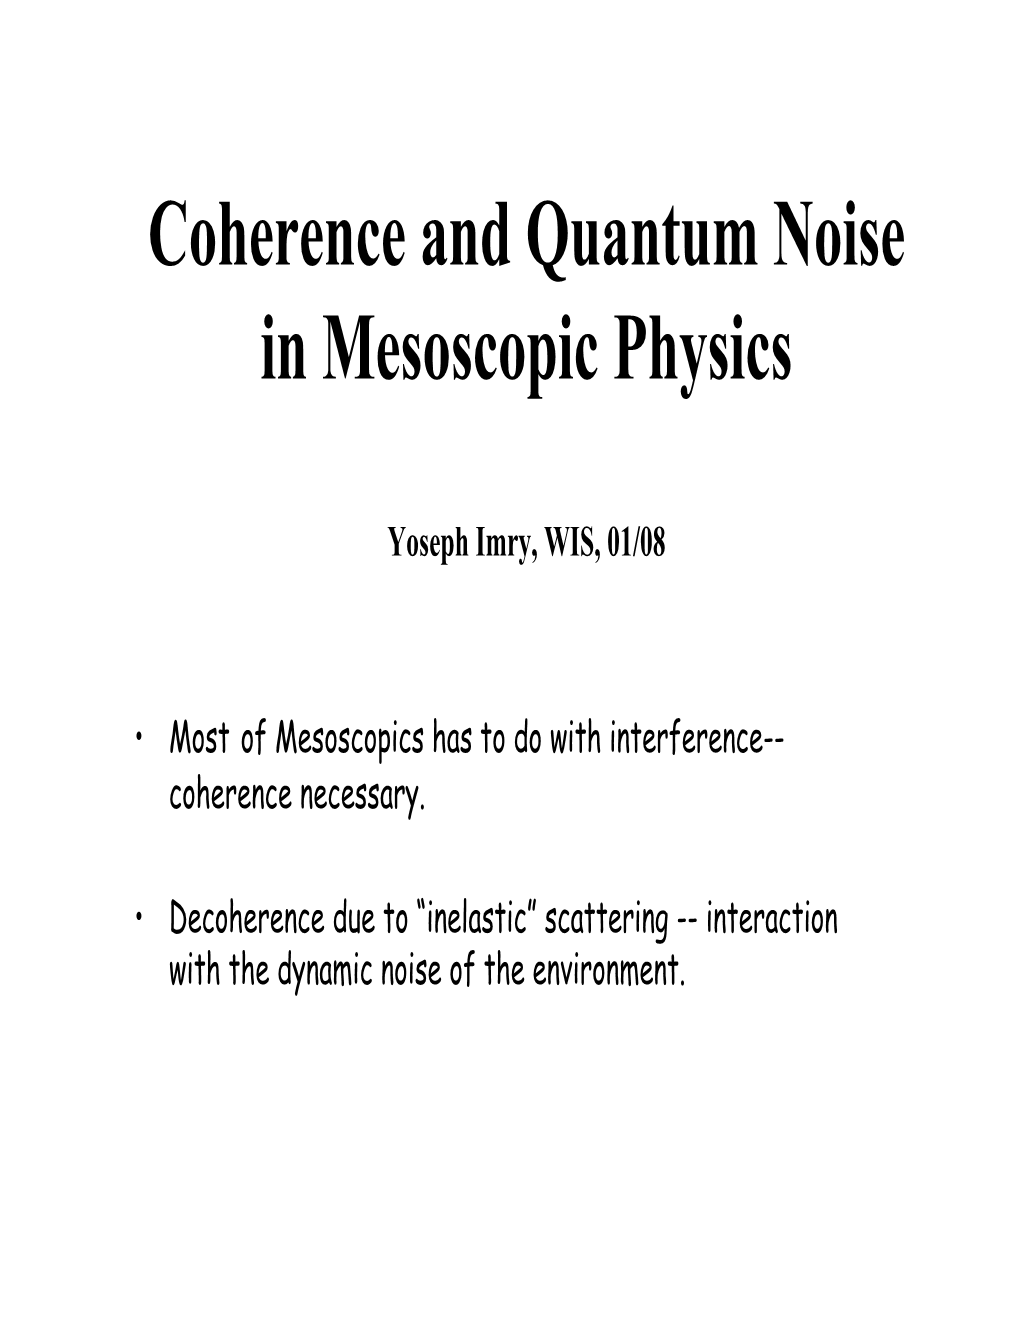 Coherence and Quantum Noise in Mesoscopic Physics